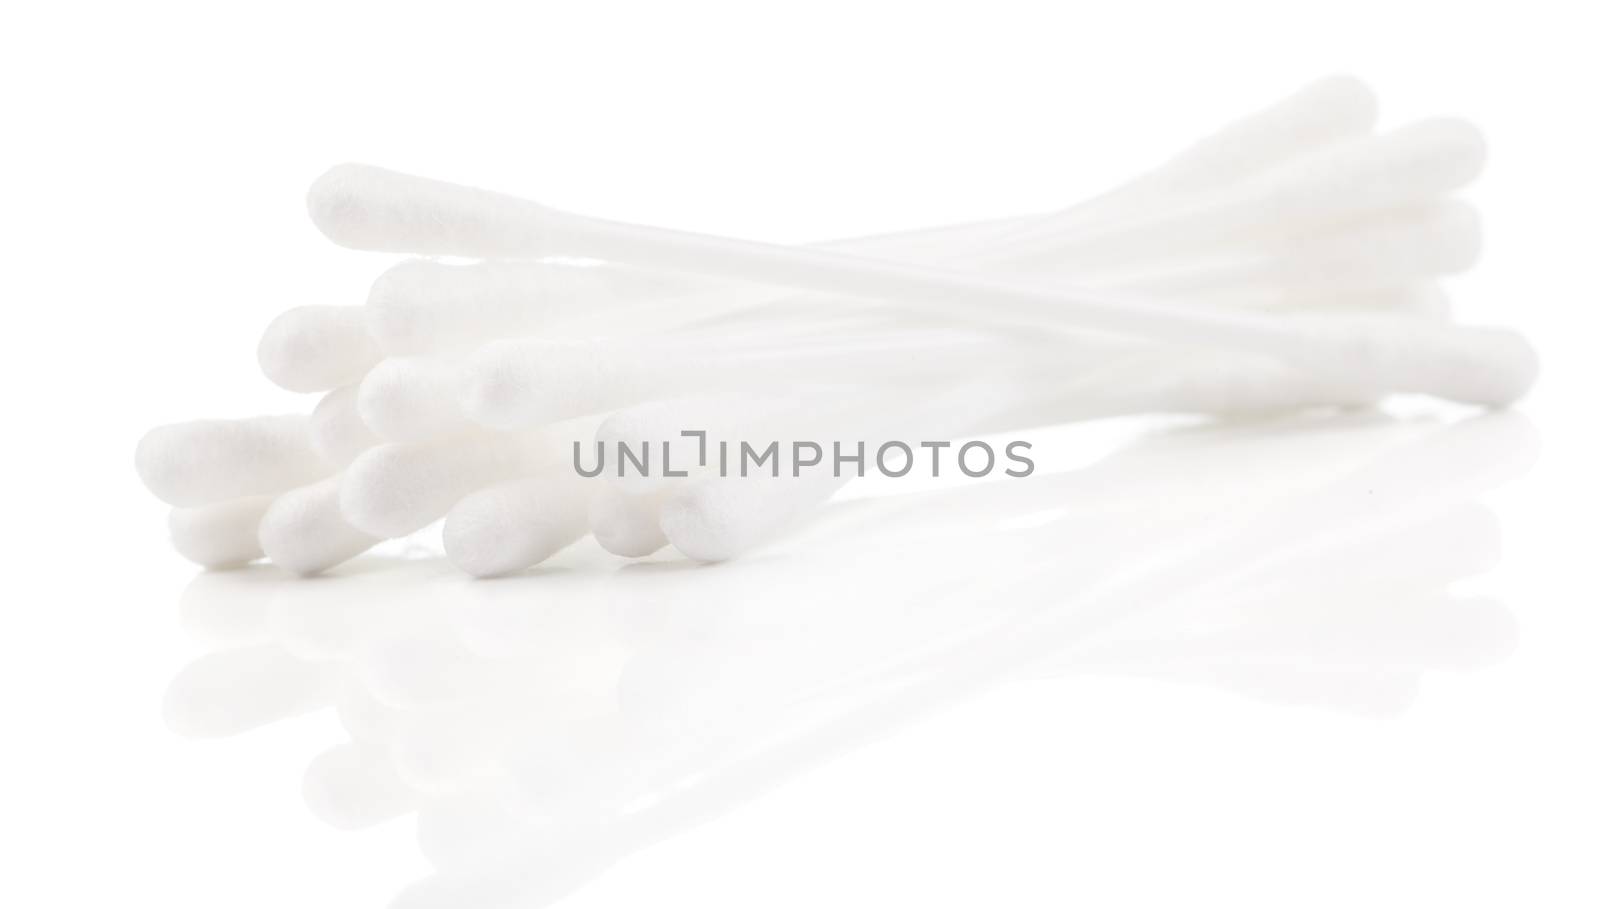 Cotton sticks isolated on the white background by motorolka